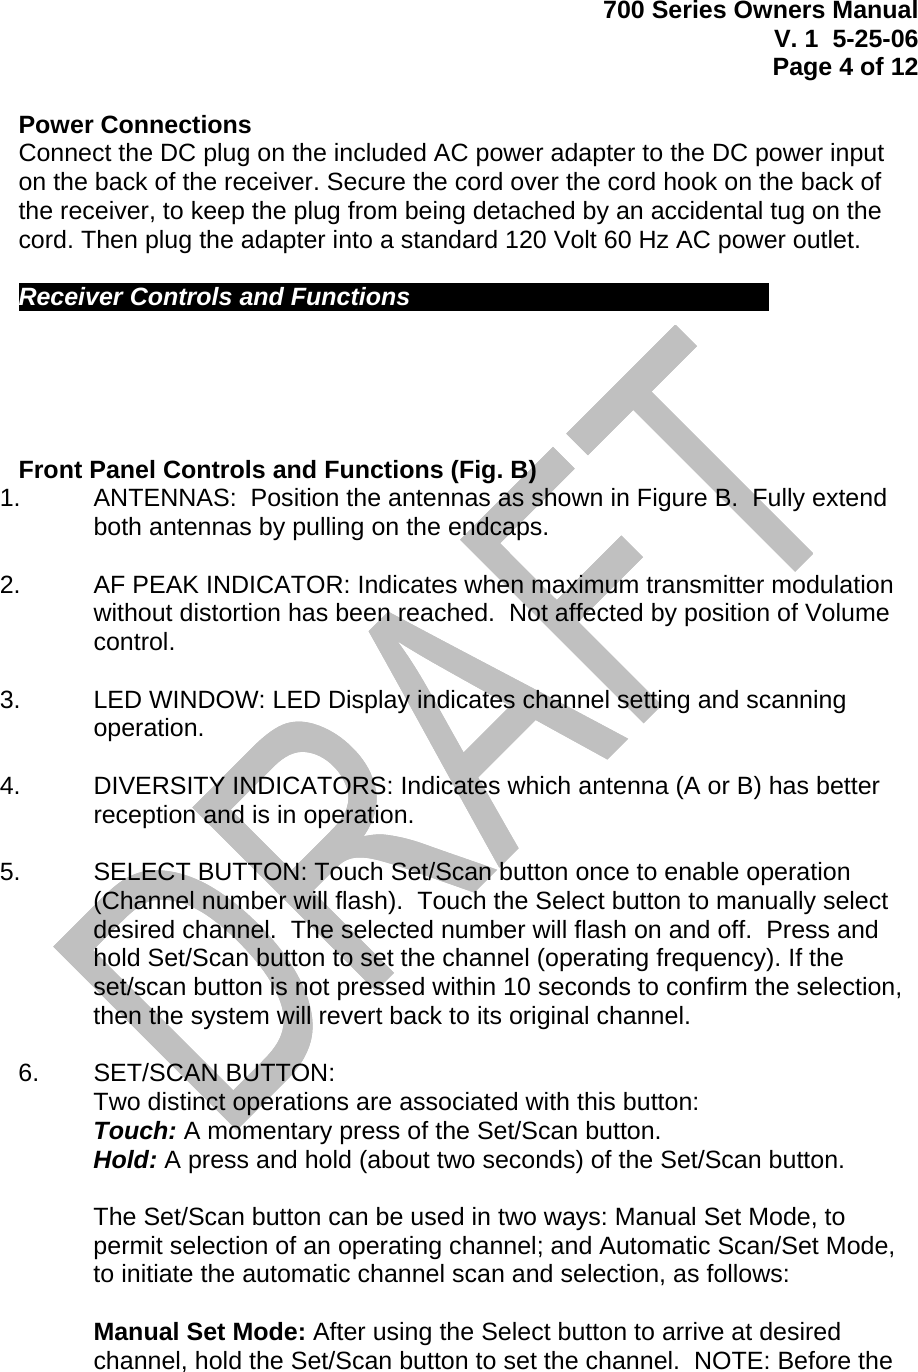 700 Series Owners Manual V. 1  5-25-06 Page 4 of 12   Power Connections Connect the DC plug on the included AC power adapter to the DC power input on the back of the receiver. Secure the cord over the cord hook on the back of the receiver, to keep the plug from being detached by an accidental tug on the cord. Then plug the adapter into a standard 120 Volt 60 Hz AC power outlet.   Receiver Controls and Functions             Front Panel Controls and Functions (Fig. B) 1.    ANTENNAS:  Position the antennas as shown in Figure B.  Fully extend both antennas by pulling on the endcaps.  2.    AF PEAK INDICATOR: Indicates when maximum transmitter modulation without distortion has been reached.  Not affected by position of Volume control.  3.   LED WINDOW: LED Display indicates channel setting and scanning operation.    4.    DIVERSITY INDICATORS: Indicates which antenna (A or B) has better reception and is in operation.  5.   SELECT BUTTON: Touch Set/Scan button once to enable operation (Channel number will flash).  Touch the Select button to manually select desired channel.  The selected number will flash on and off.  Press and hold Set/Scan button to set the channel (operating frequency). If the set/scan button is not pressed within 10 seconds to confirm the selection, then the system will revert back to its original channel.  6.   SET/SCAN BUTTON:  Two distinct operations are associated with this button: Touch: A momentary press of the Set/Scan button. Hold: A press and hold (about two seconds) of the Set/Scan button.  The Set/Scan button can be used in two ways: Manual Set Mode, to permit selection of an operating channel; and Automatic Scan/Set Mode, to initiate the automatic channel scan and selection, as follows:  Manual Set Mode: After using the Select button to arrive at desired channel, hold the Set/Scan button to set the channel.  NOTE: Before the 